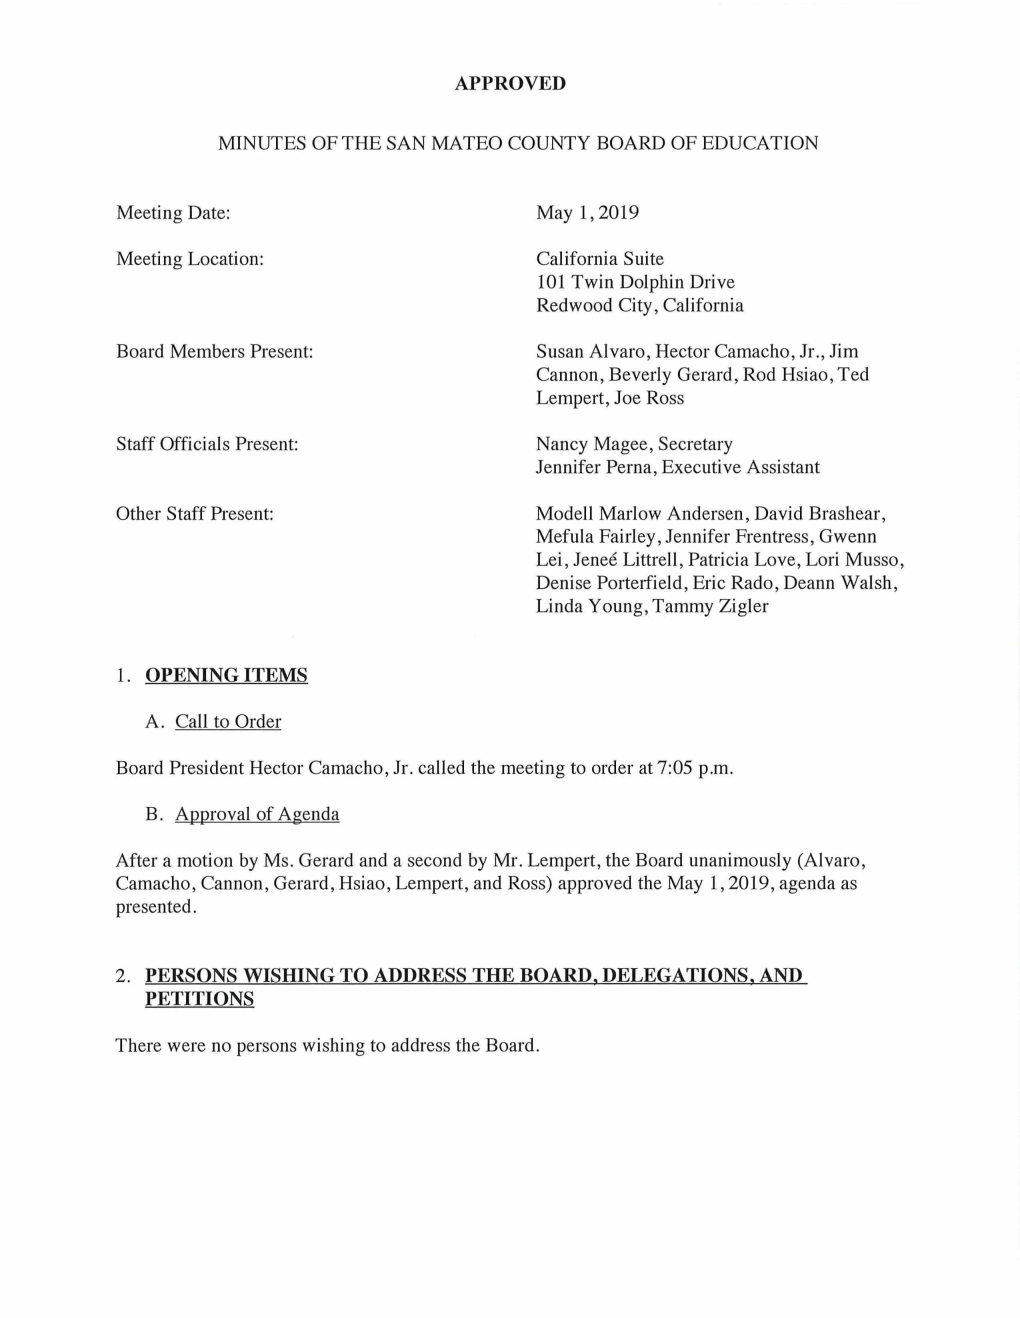 San Mateo County Board of Education May 1, 2019 Approved Minutes